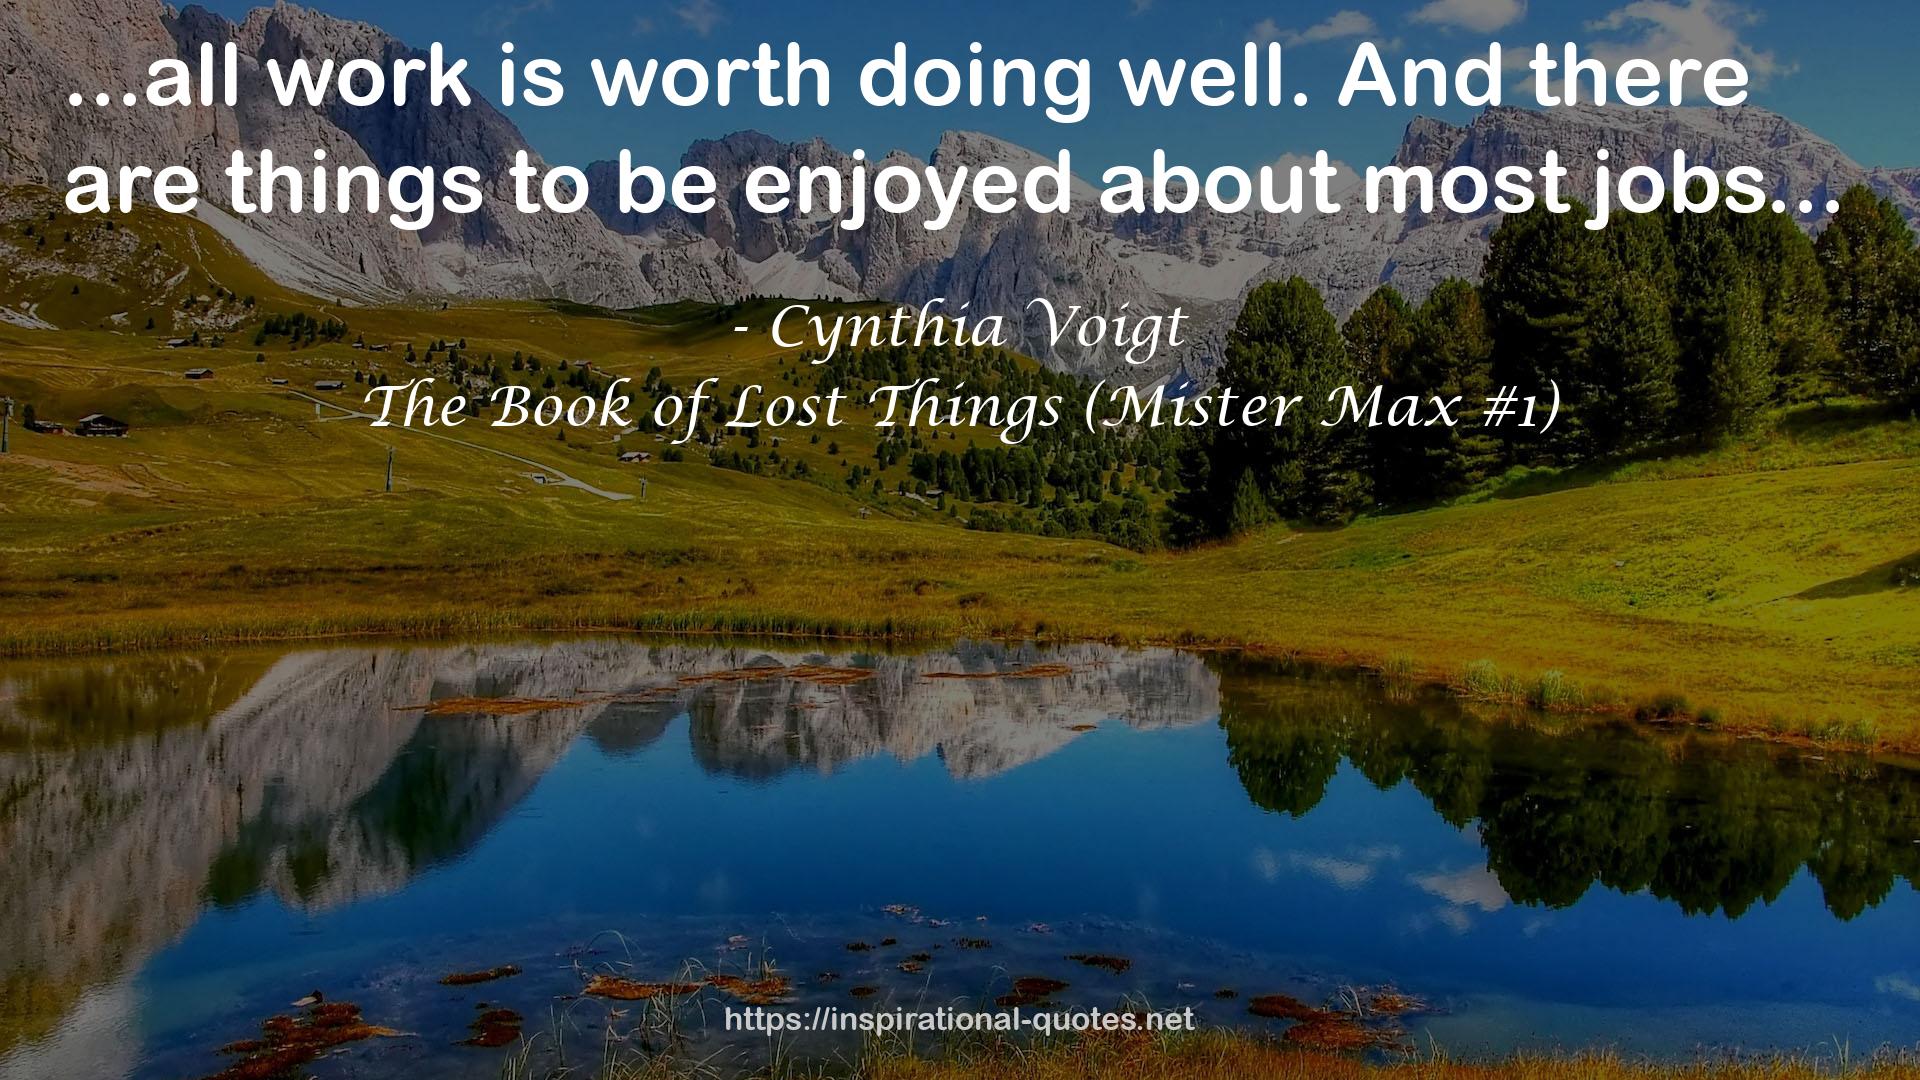 The Book of Lost Things (Mister Max #1) QUOTES